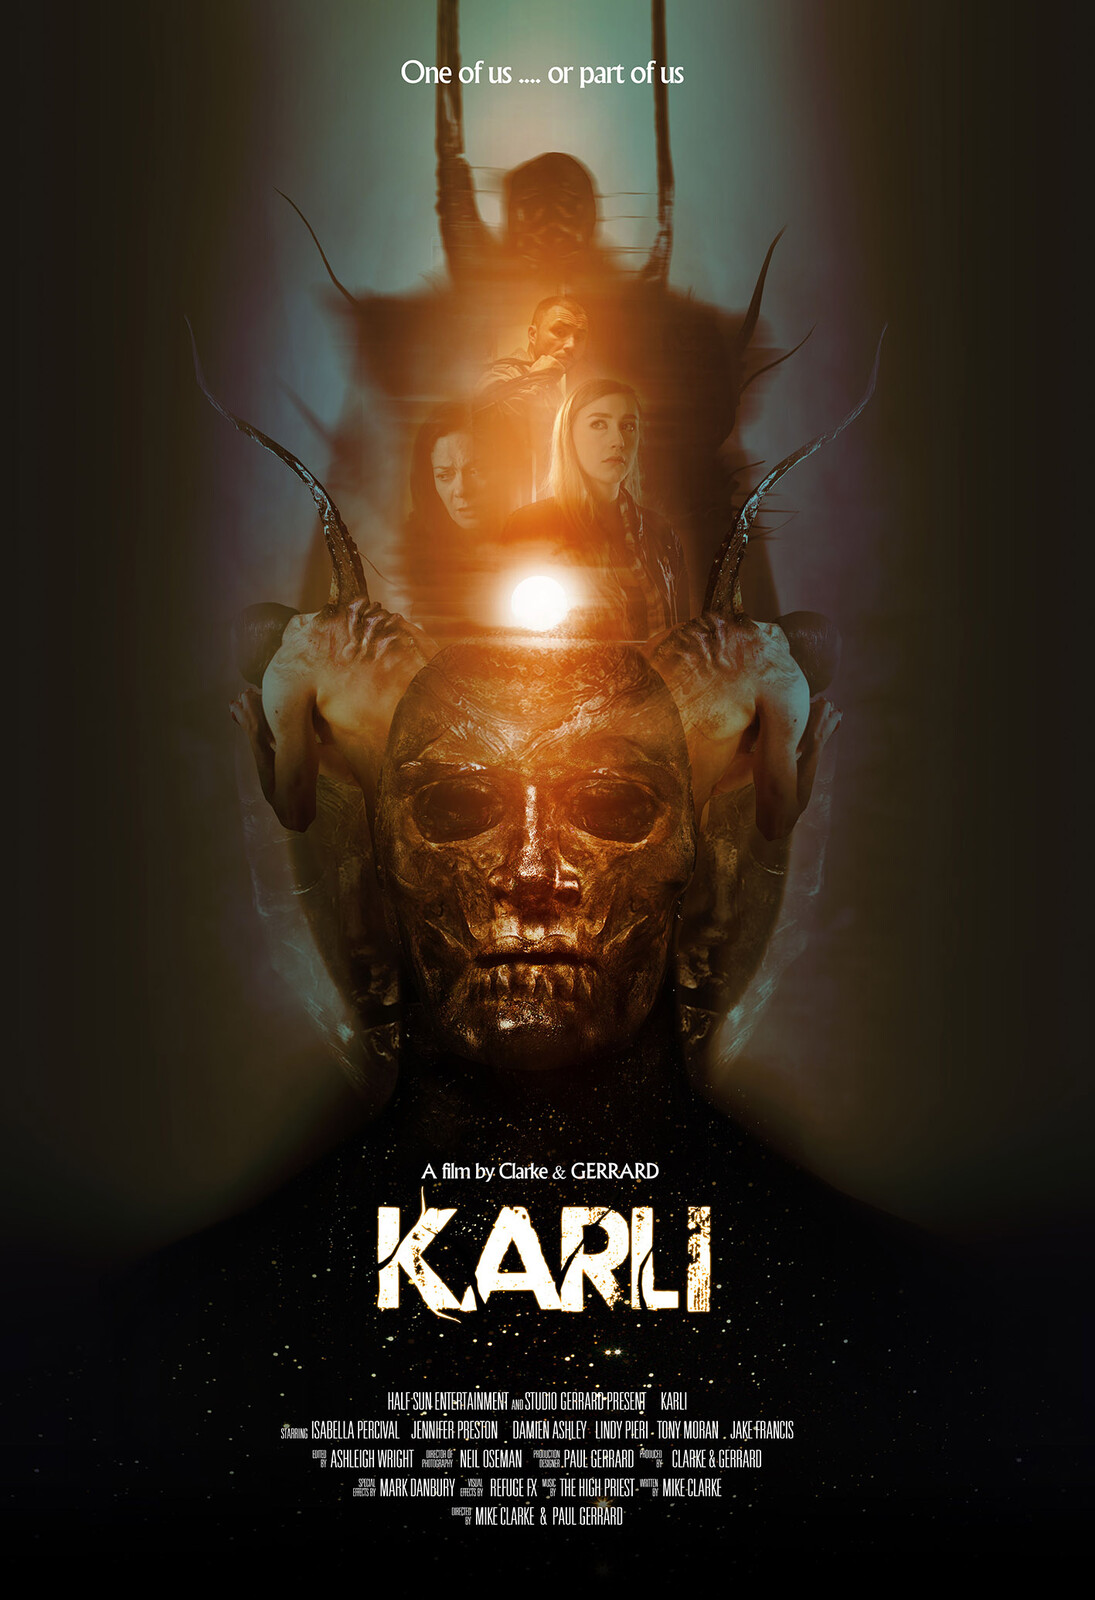 Title: KARLI 
Feature Film. HORROR
Status: IN POST PRODUCTION
Email to request teaser trailer and sales deck.

https://rue-morgue.com/see-the-trailer-for-karli-a-new-chiller-from-the-creator-of-hellraiser-origins/

